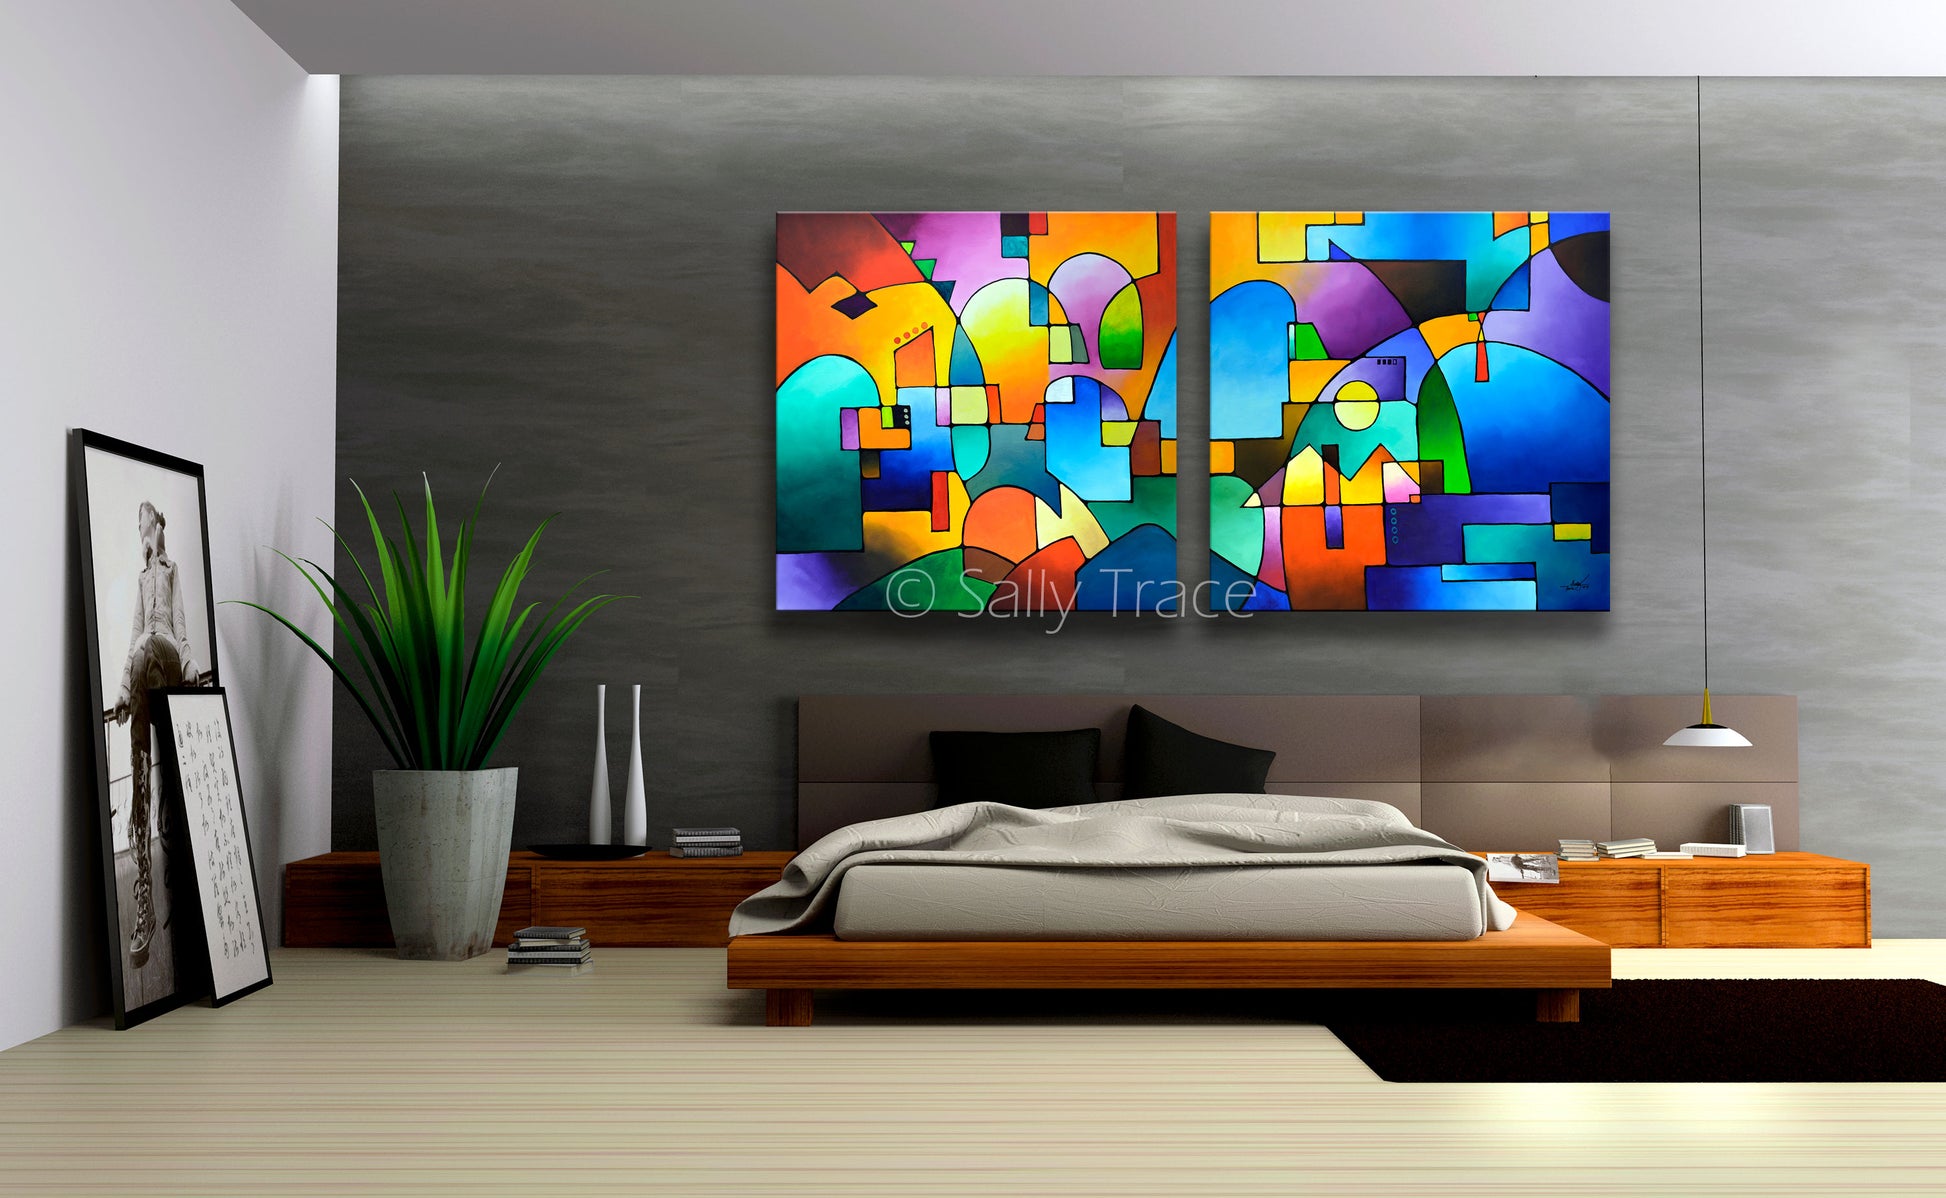 Giclee prints on stretched canvas made from my original abstract painting "Urbanity Vista". These stretched canvas giclee prints are made from my original abstract diptych painting, one of my Urbanity Series paintings and prints, room view.